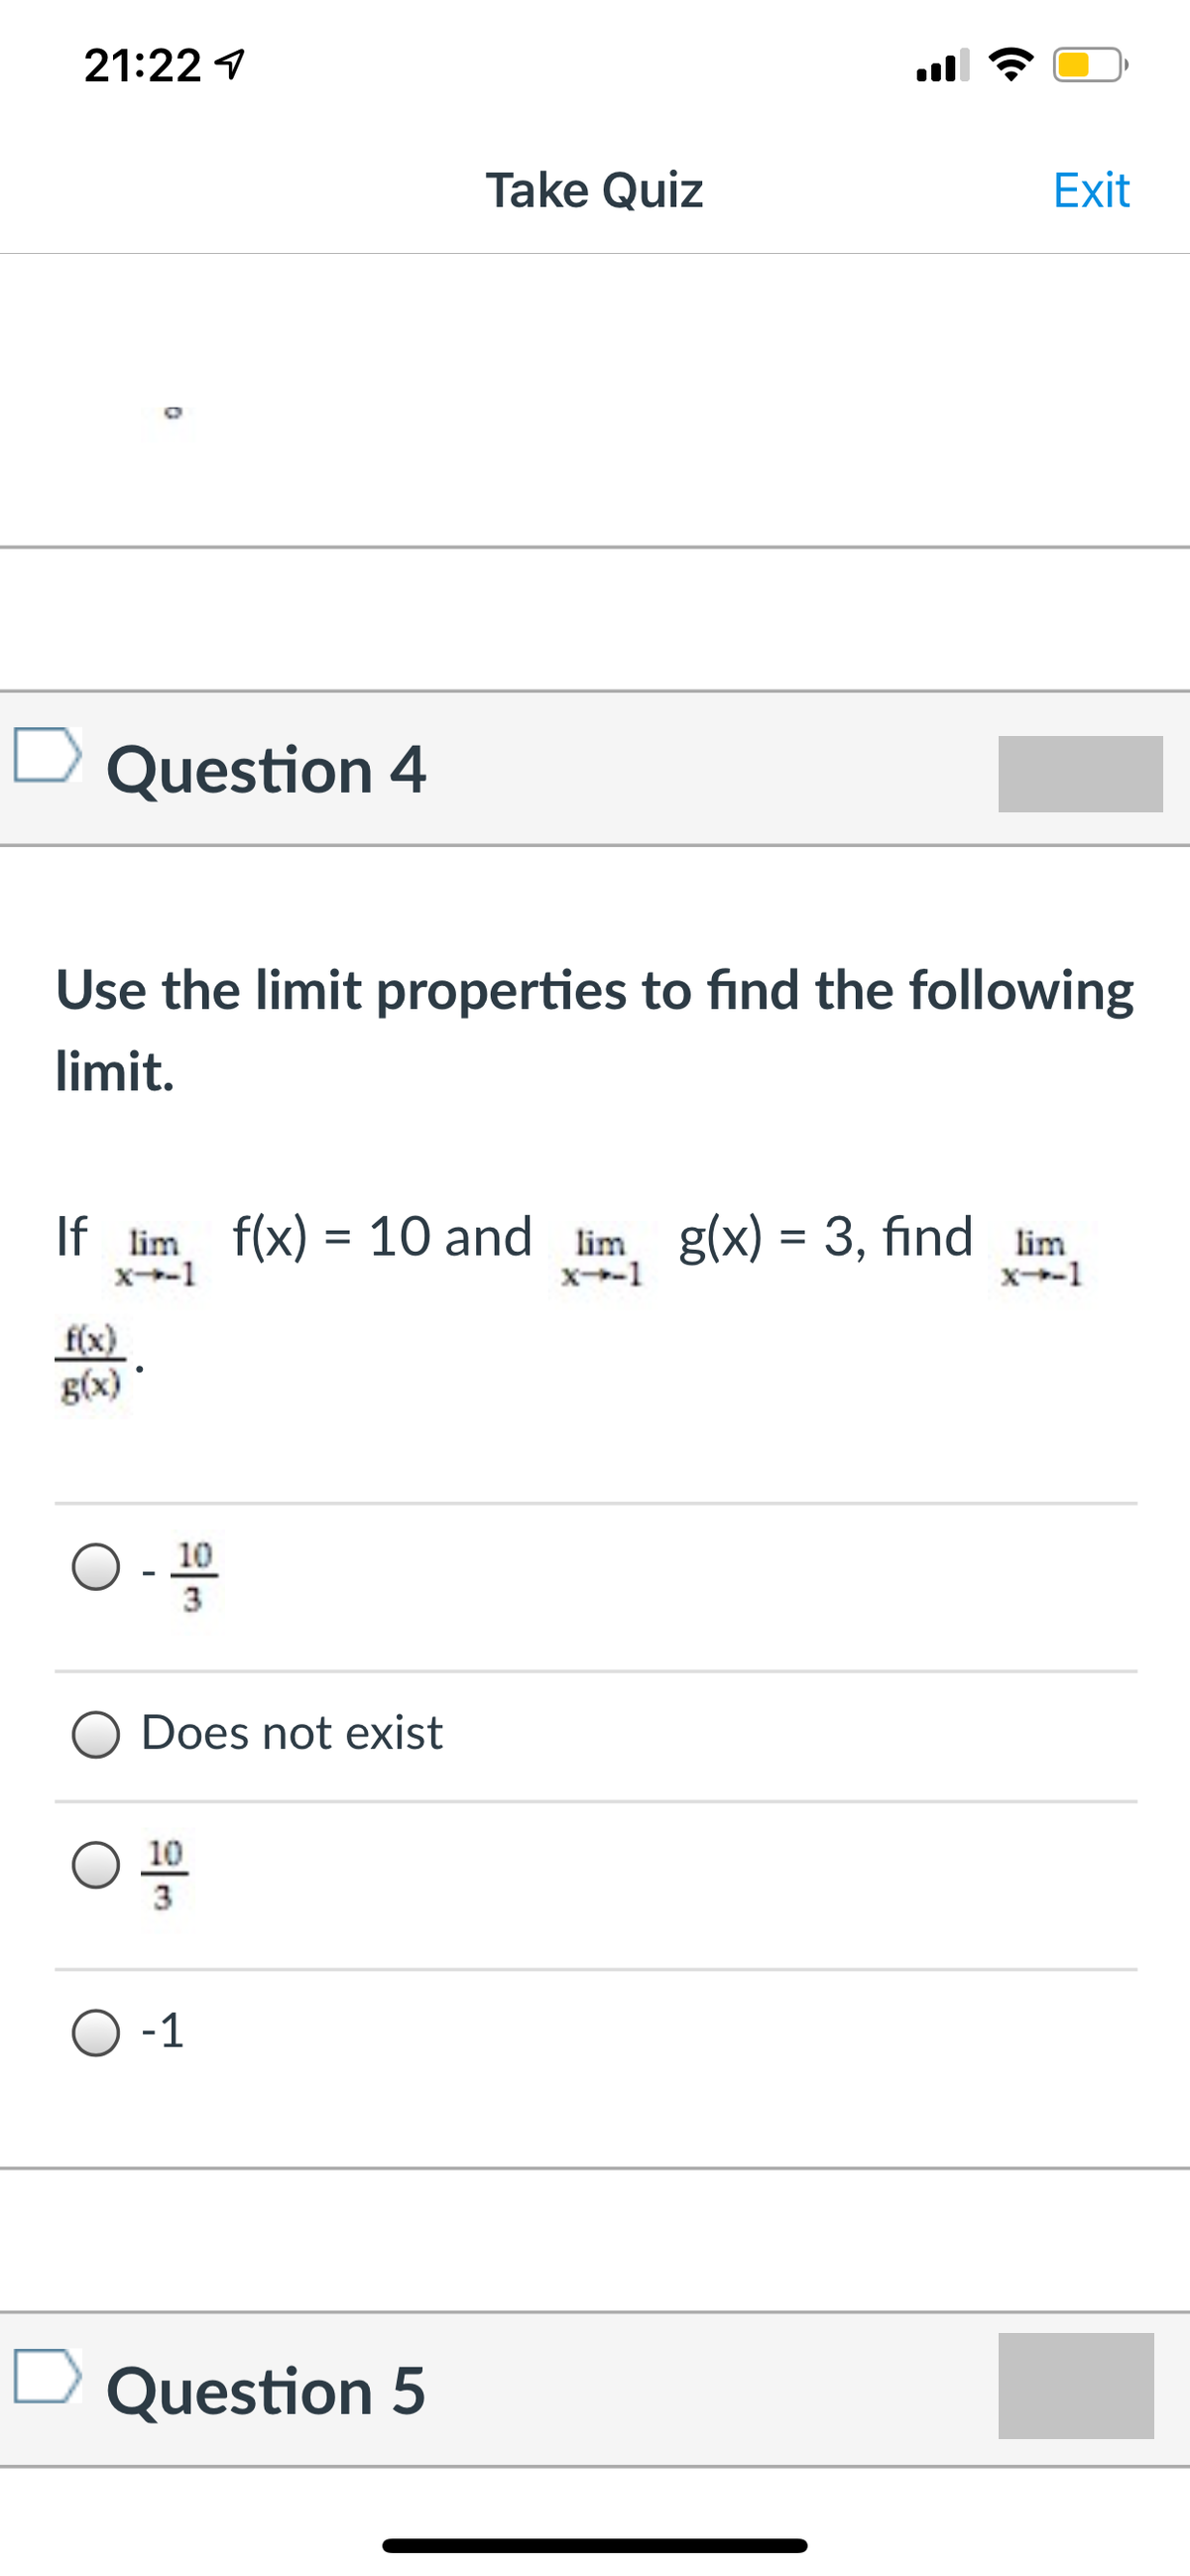 21:22 1
Take Quiz
Exit
Question 4
Use the limit properties to find the following
limit.
If lim f(x) = 10 and lim g(x) = 3, find lim
x-1
x-1
x-1
f(x)
g(x)
10
3
Does not exist
10
3
-1
Question 5
